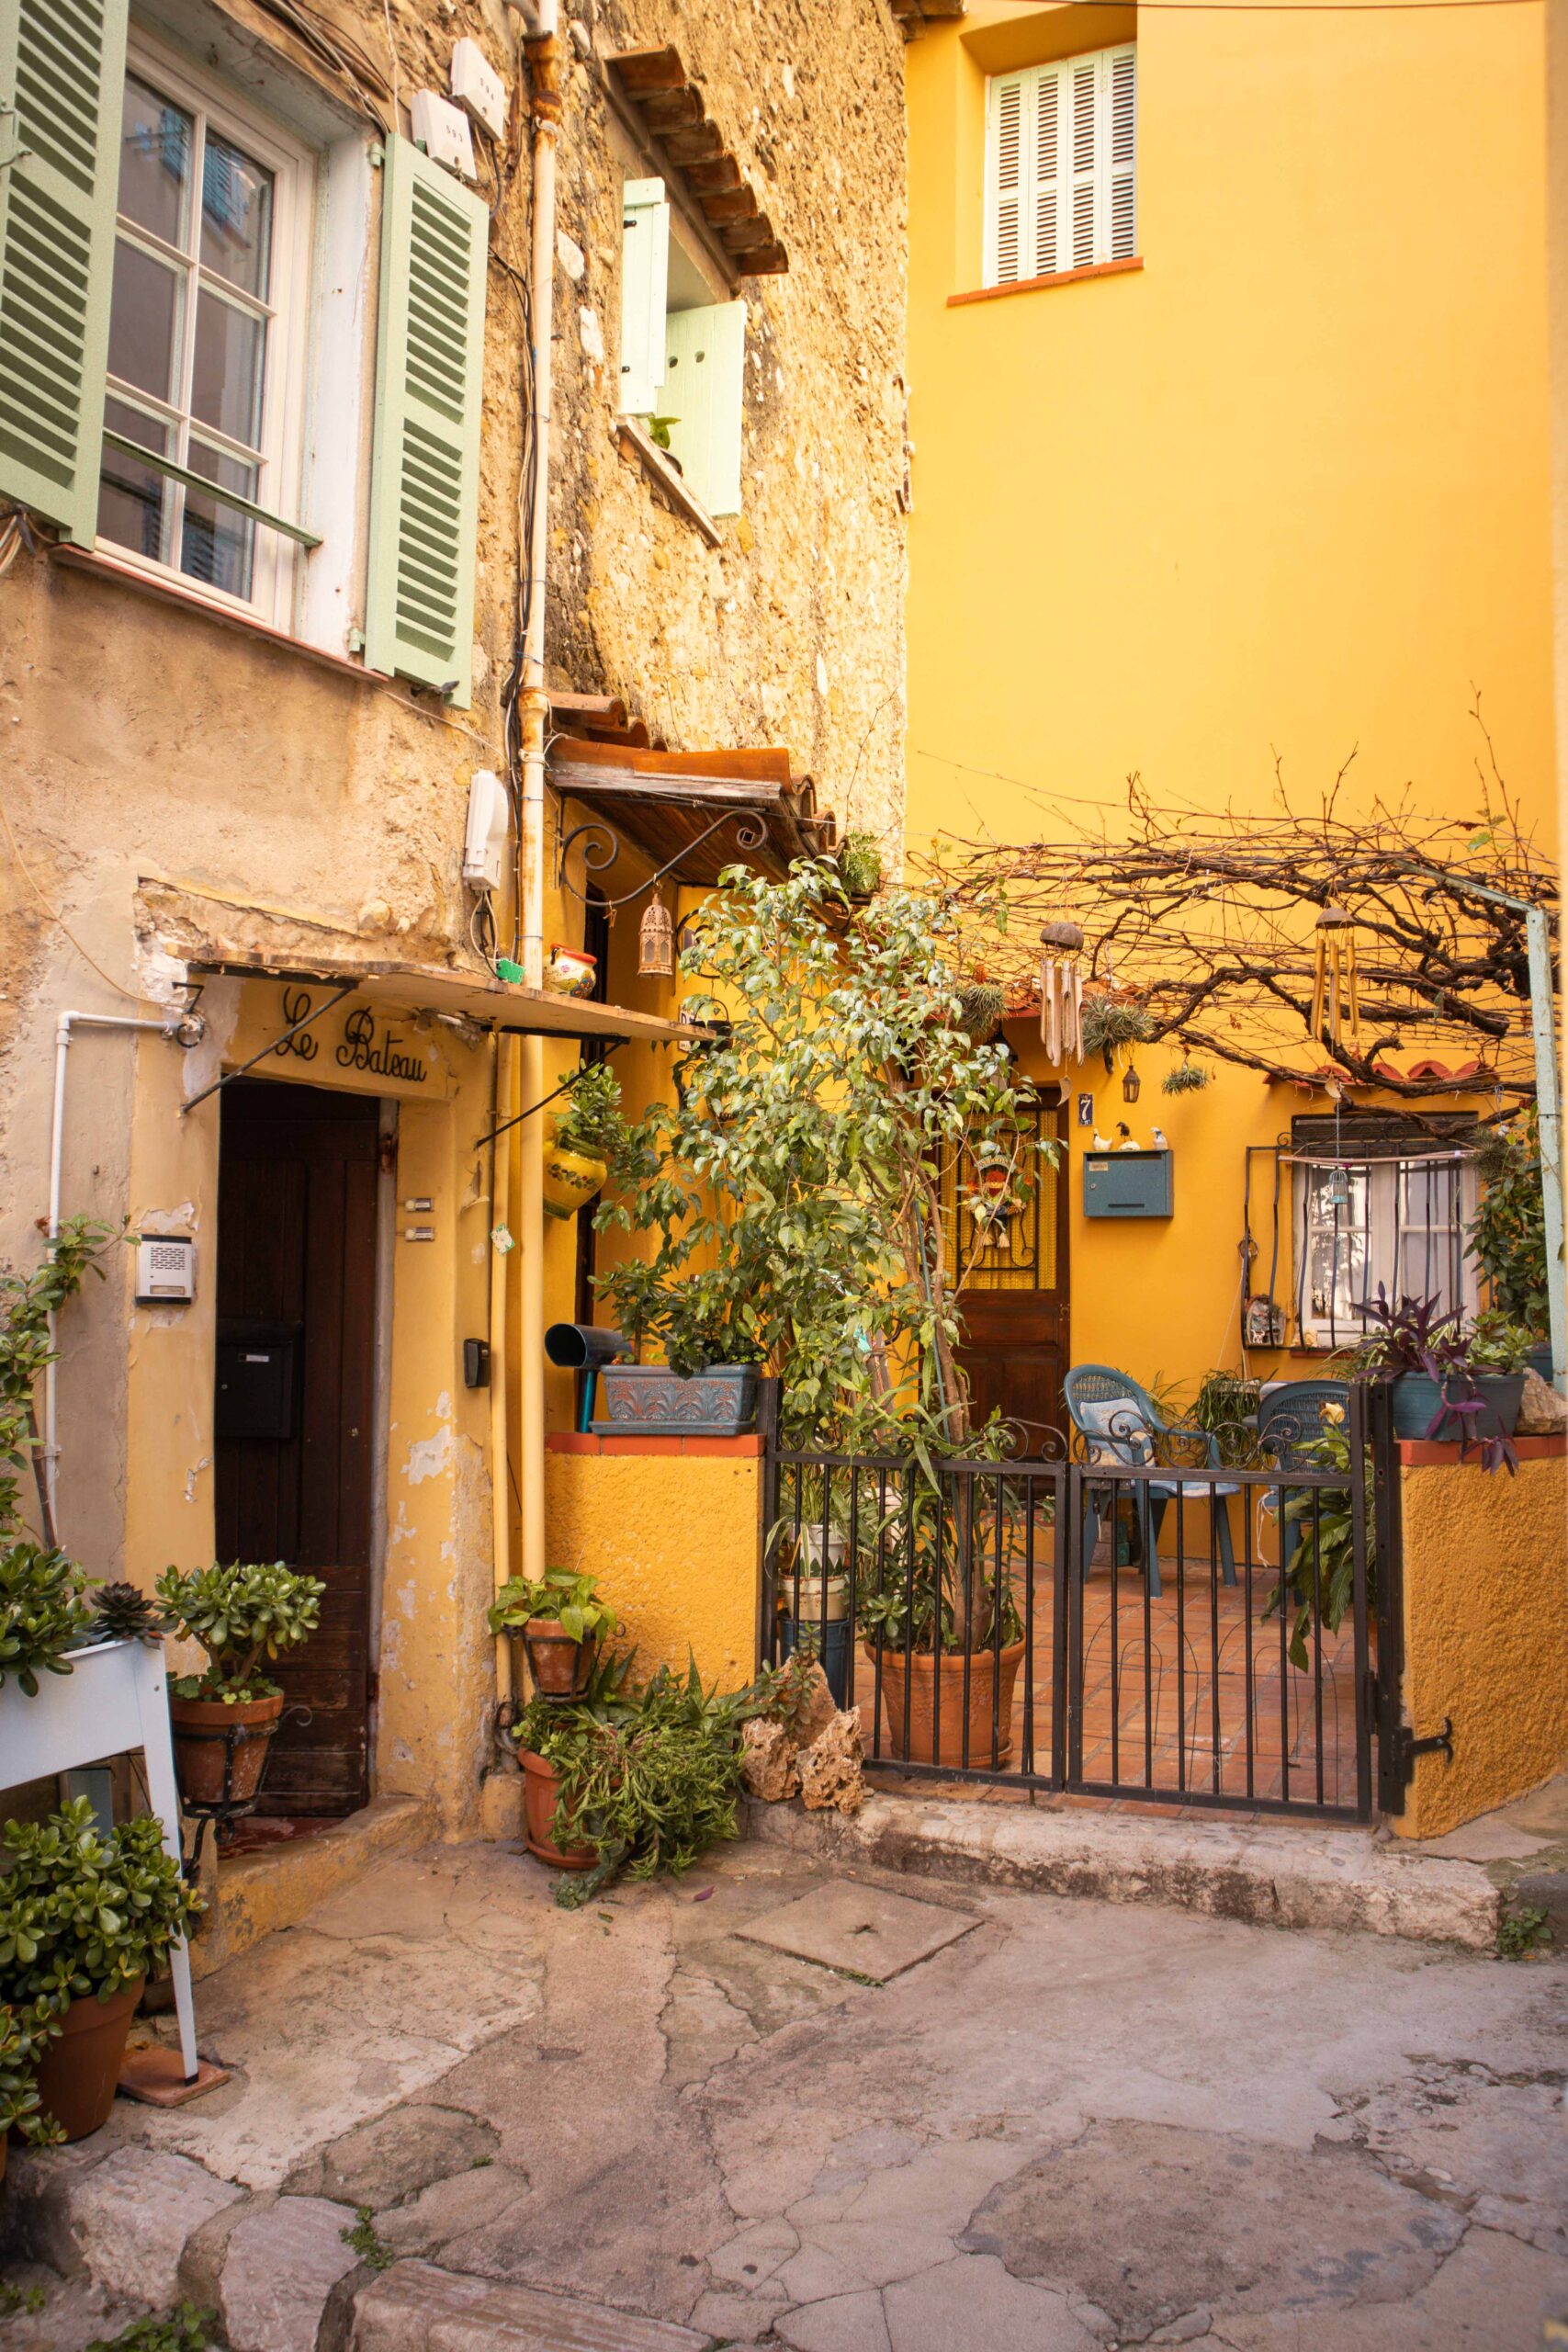 Yellow house front in the Old Town of Menton, France